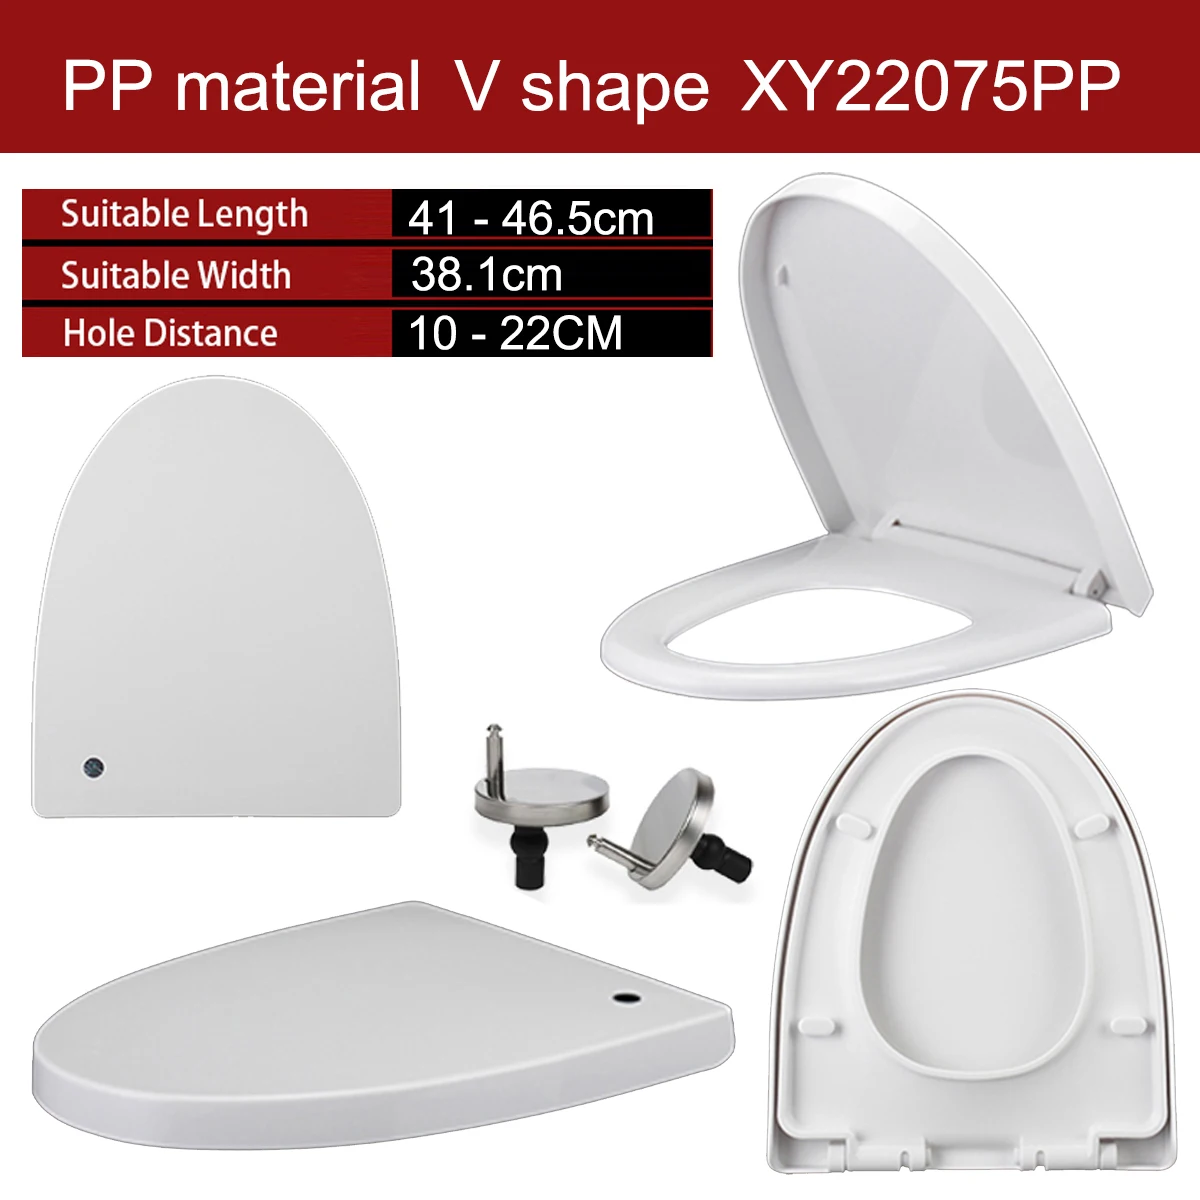 

Universal V Shape Elongated Slow Close WC Toilet Seats Cover Bowl Lid Top Mounted Quick Release PP Board Soft Closure XY22075PP